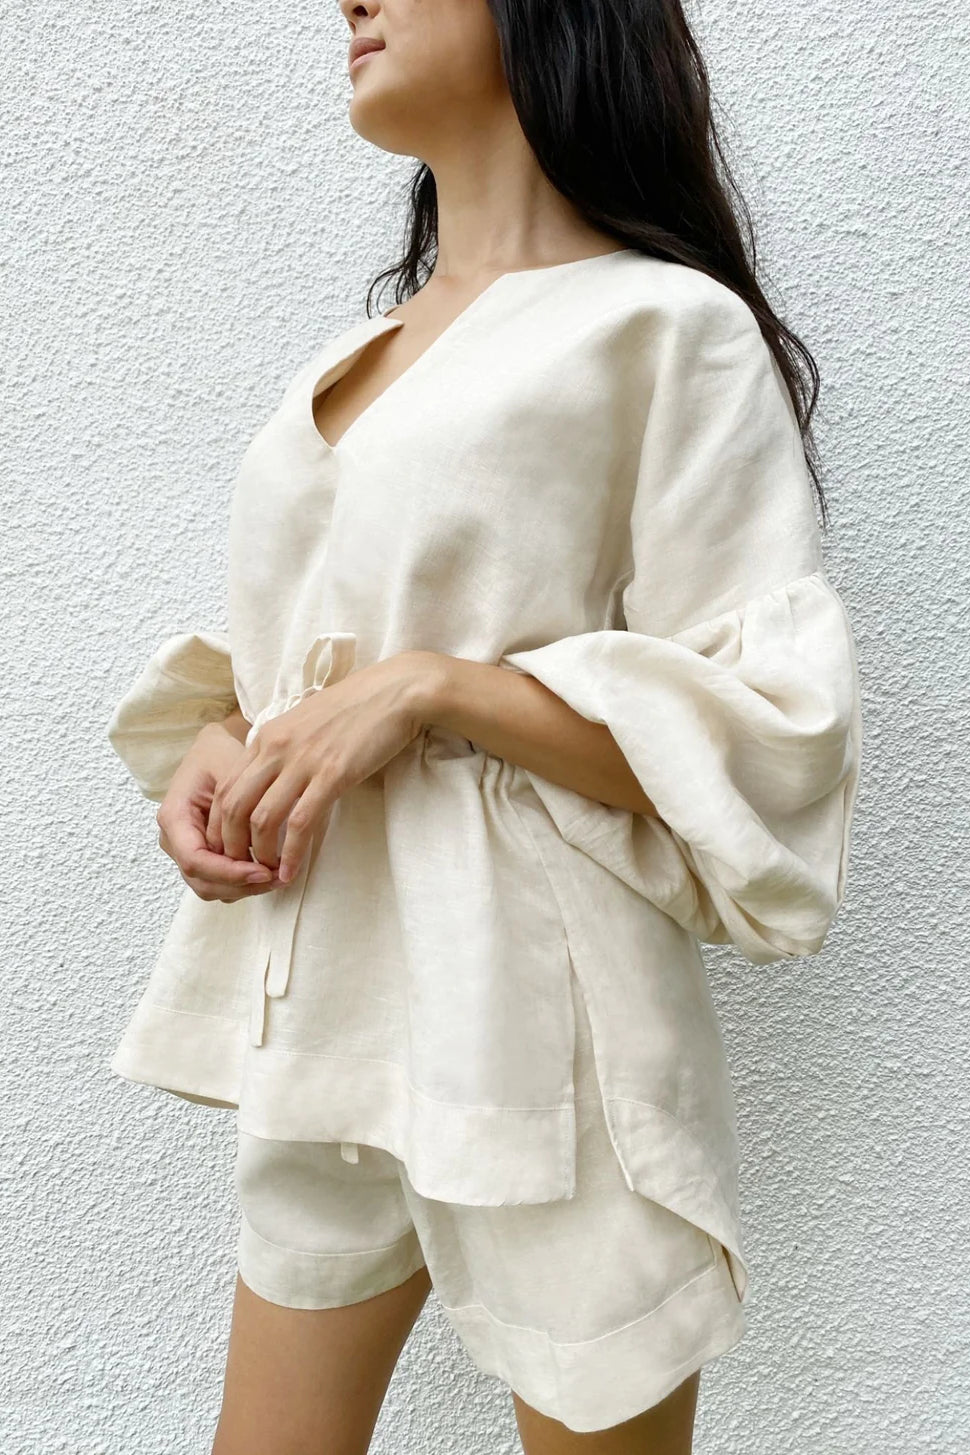 NARY - Ethical Resort Fashion - Sustainable Deadstock Linen Koh Rohng Lounge Top - Ethical Maternity Top - Ethically Made in Cambodia - AAIPA Owned Fashion Brand